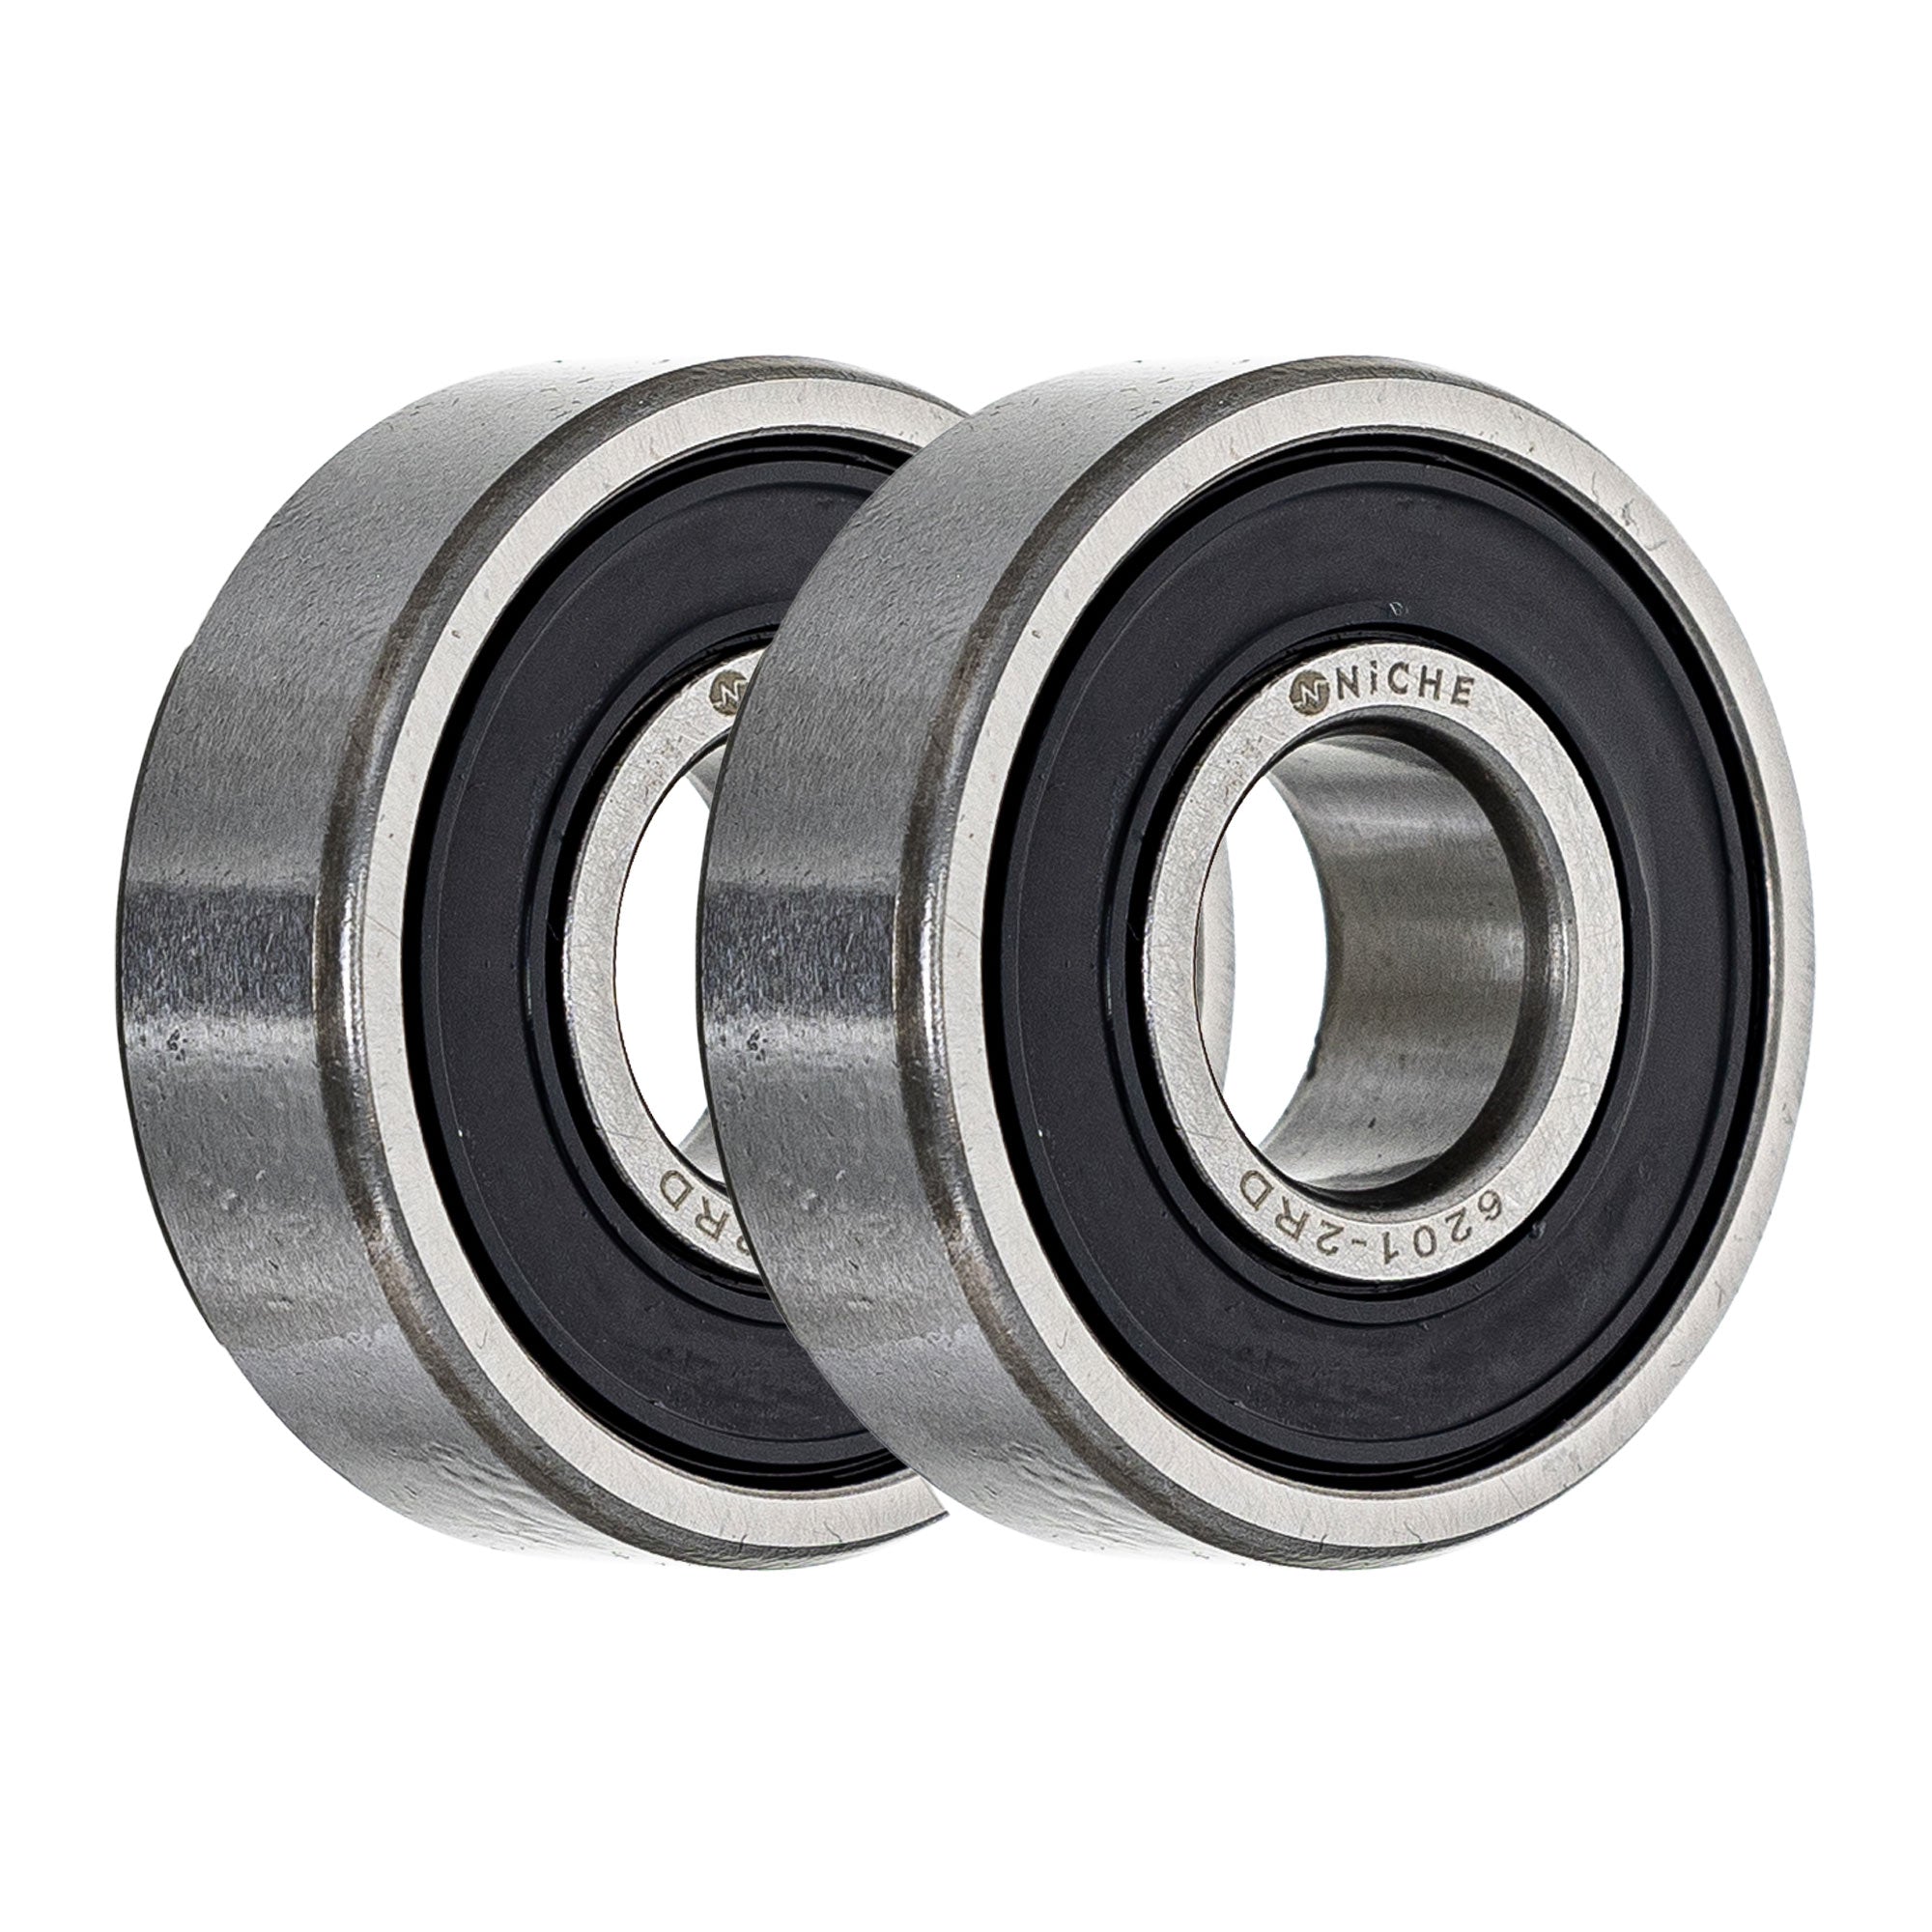 Double Row, Angular Contact, Ball Bearing Pack of 2 2-Pack for zOTHER YZ85 YZ80 XR80R XR80 NICHE 519-CBB2277R